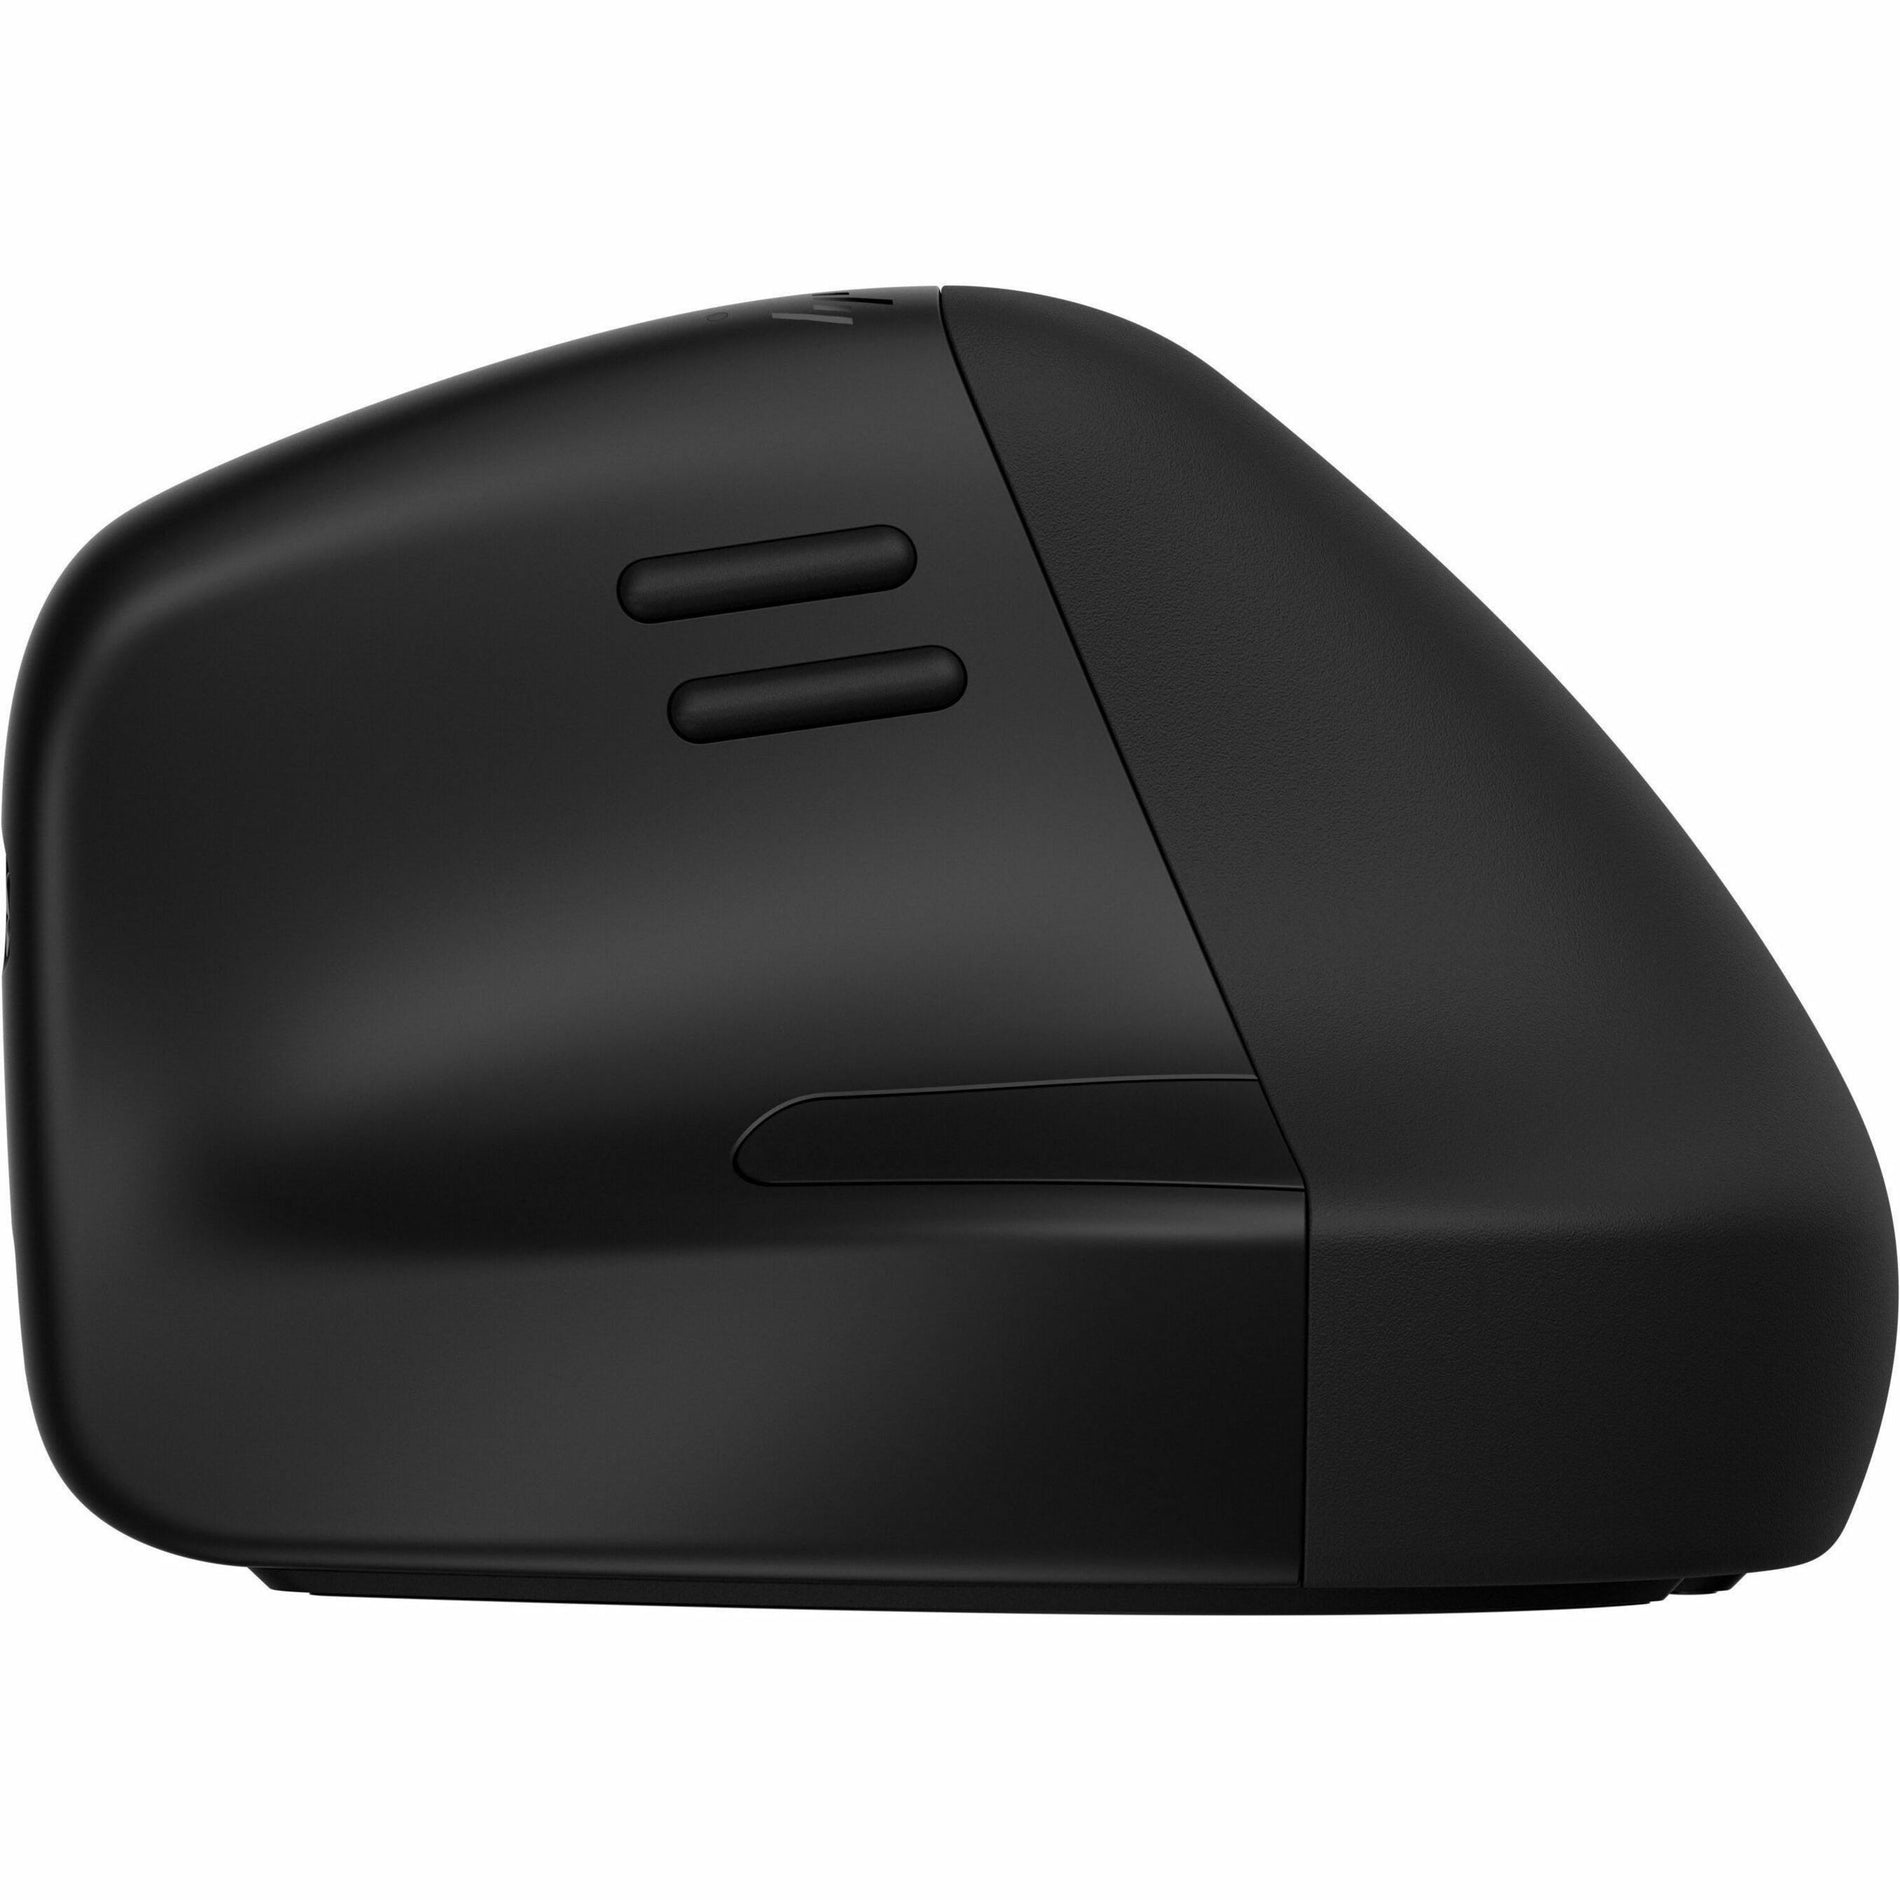 HP 925 Ergonomic Vertical Mouse For Business, Wireless Bluetooth/Radio Frequency, 4000 dpi, 6 Buttons